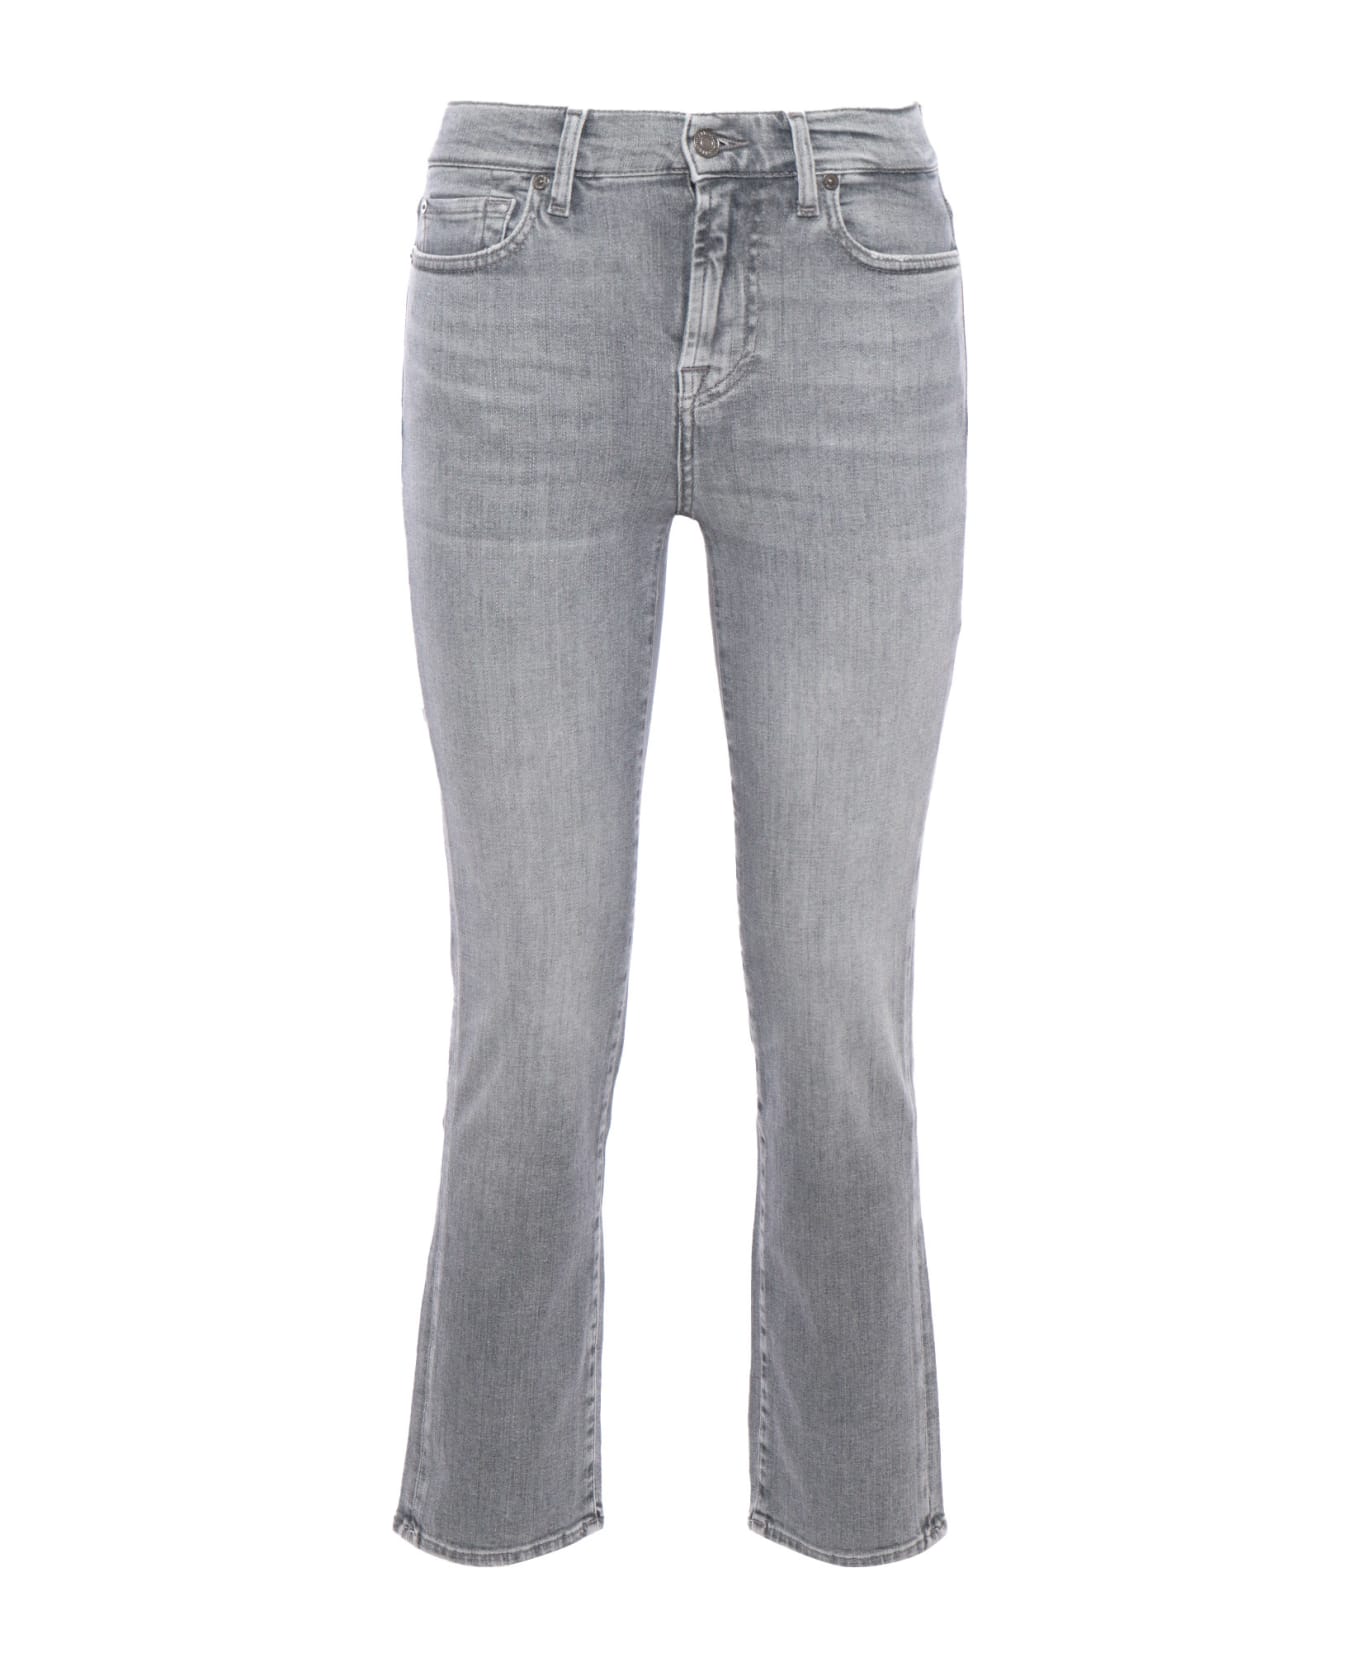 7 For All Mankind Cropped Women's Jeans. - GREY